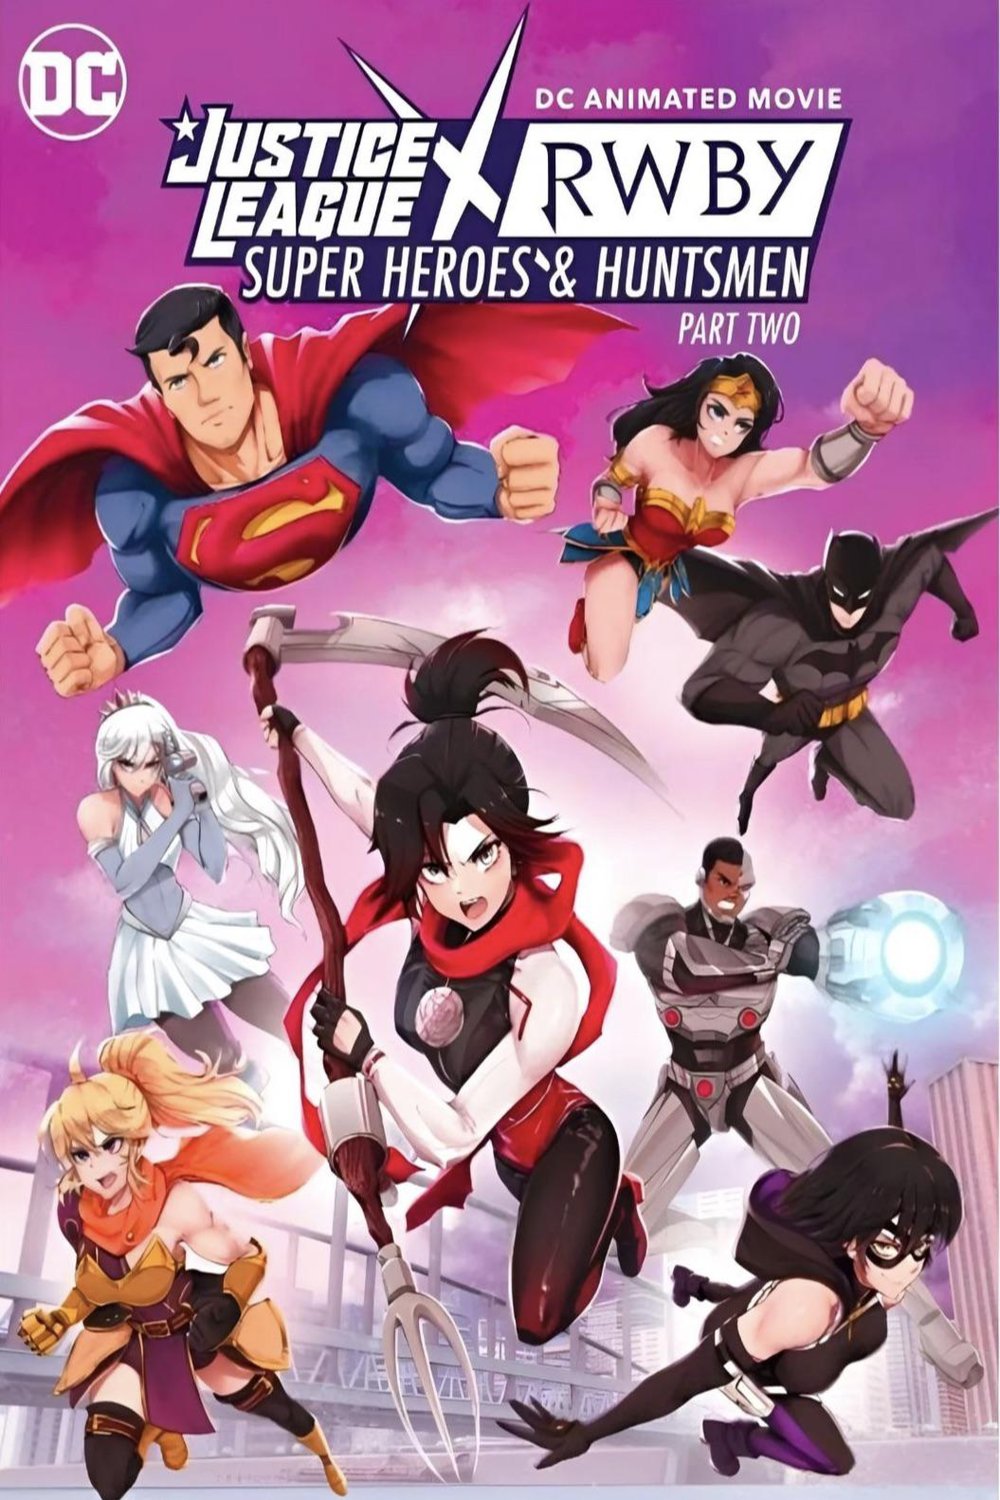 Poster of the movie Justice League x RWBY: Super Heroes and Huntsmen Part Two